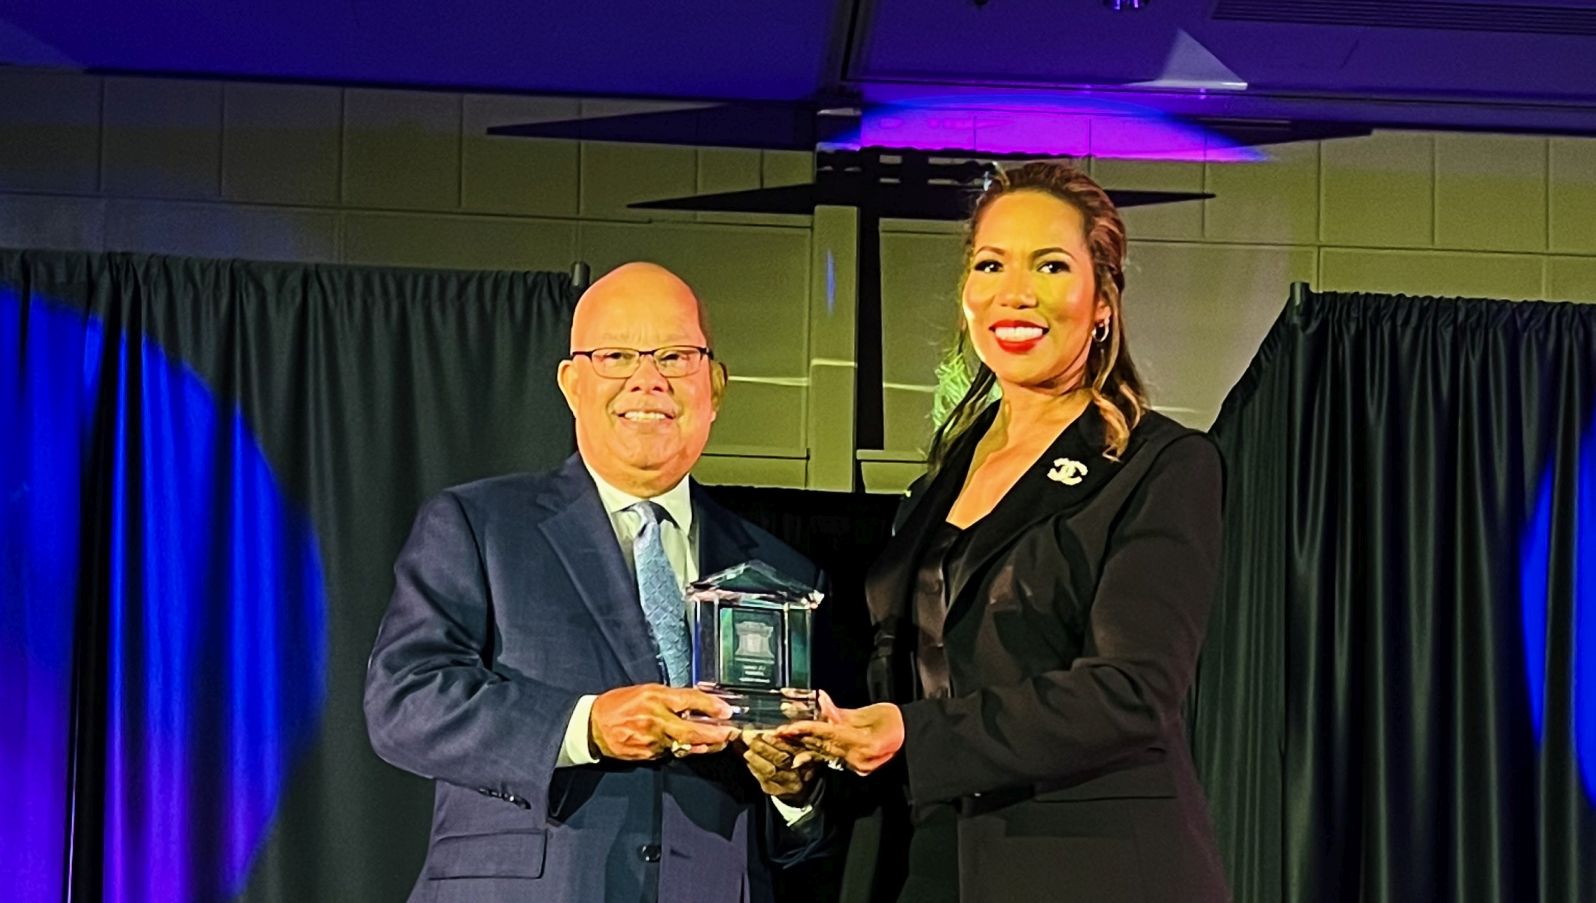 Benedict College President Roslyn Artis and Benedict alumnus I.S. Leevy Johnson were inducted into the National Black College Alumni Hall of Fame September 23.